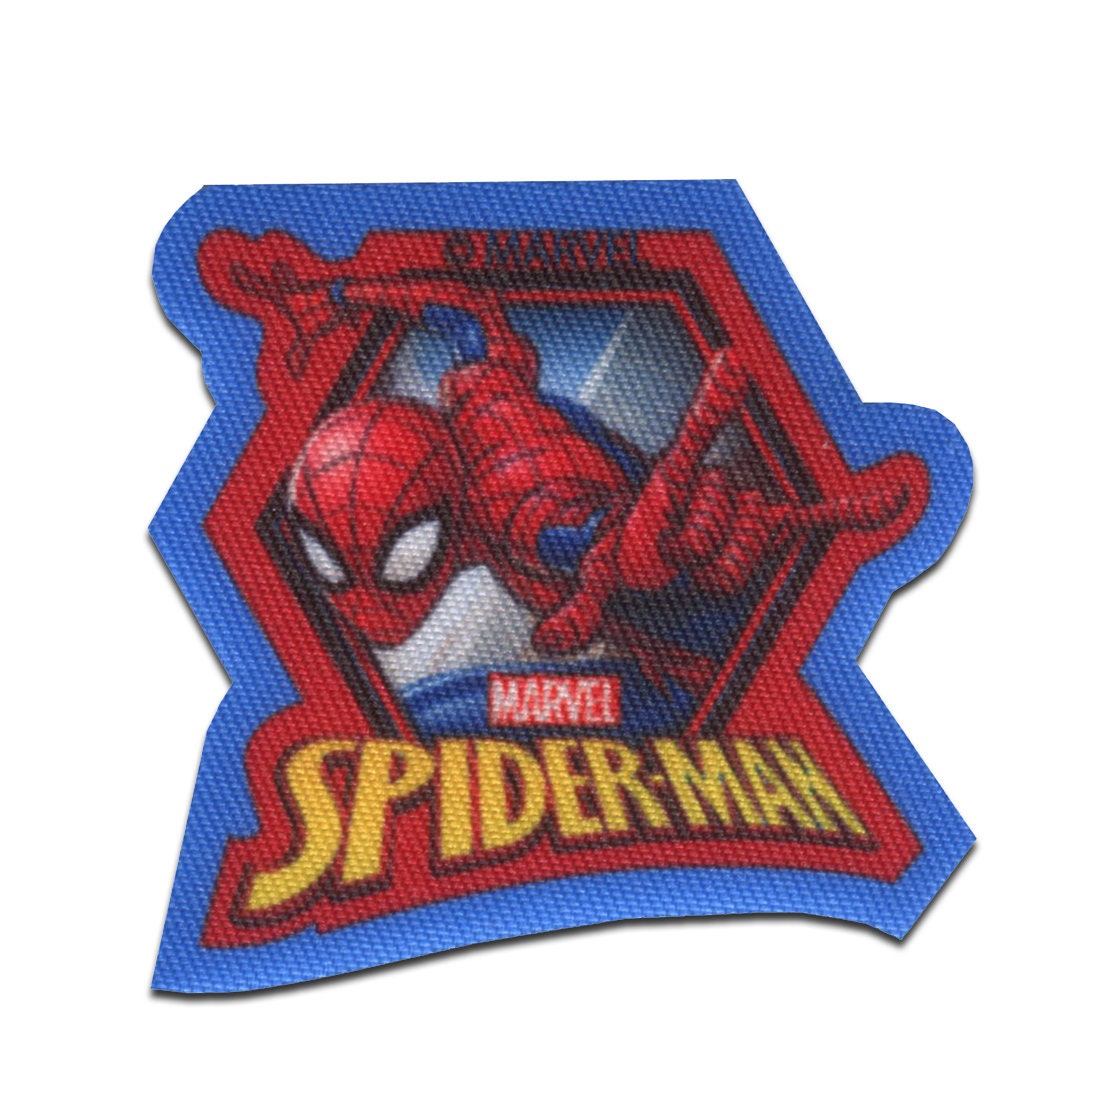 Marvel © Spiderman Comic 2 Iron on Patches, Size 2,14 X 2,30 Inch 